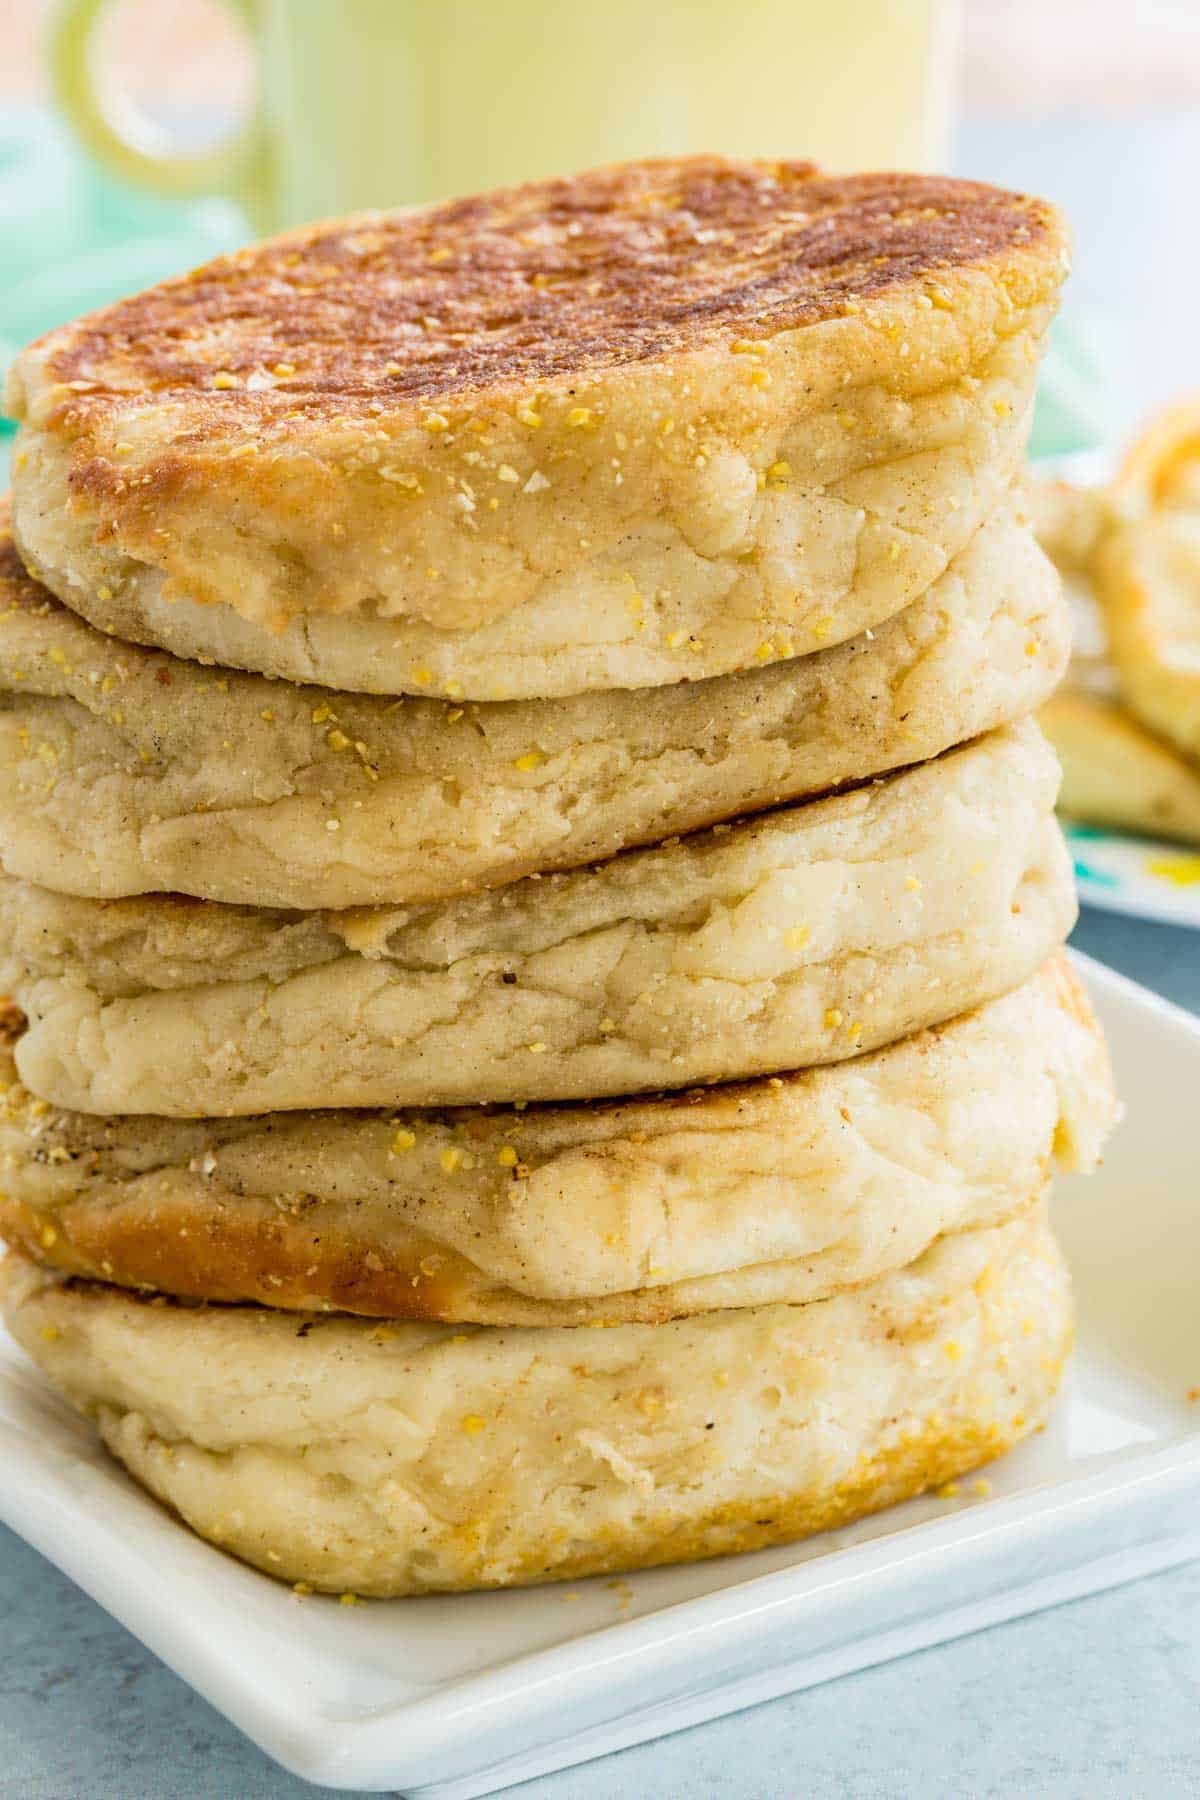 A stack of homemade gluten free English muffins.